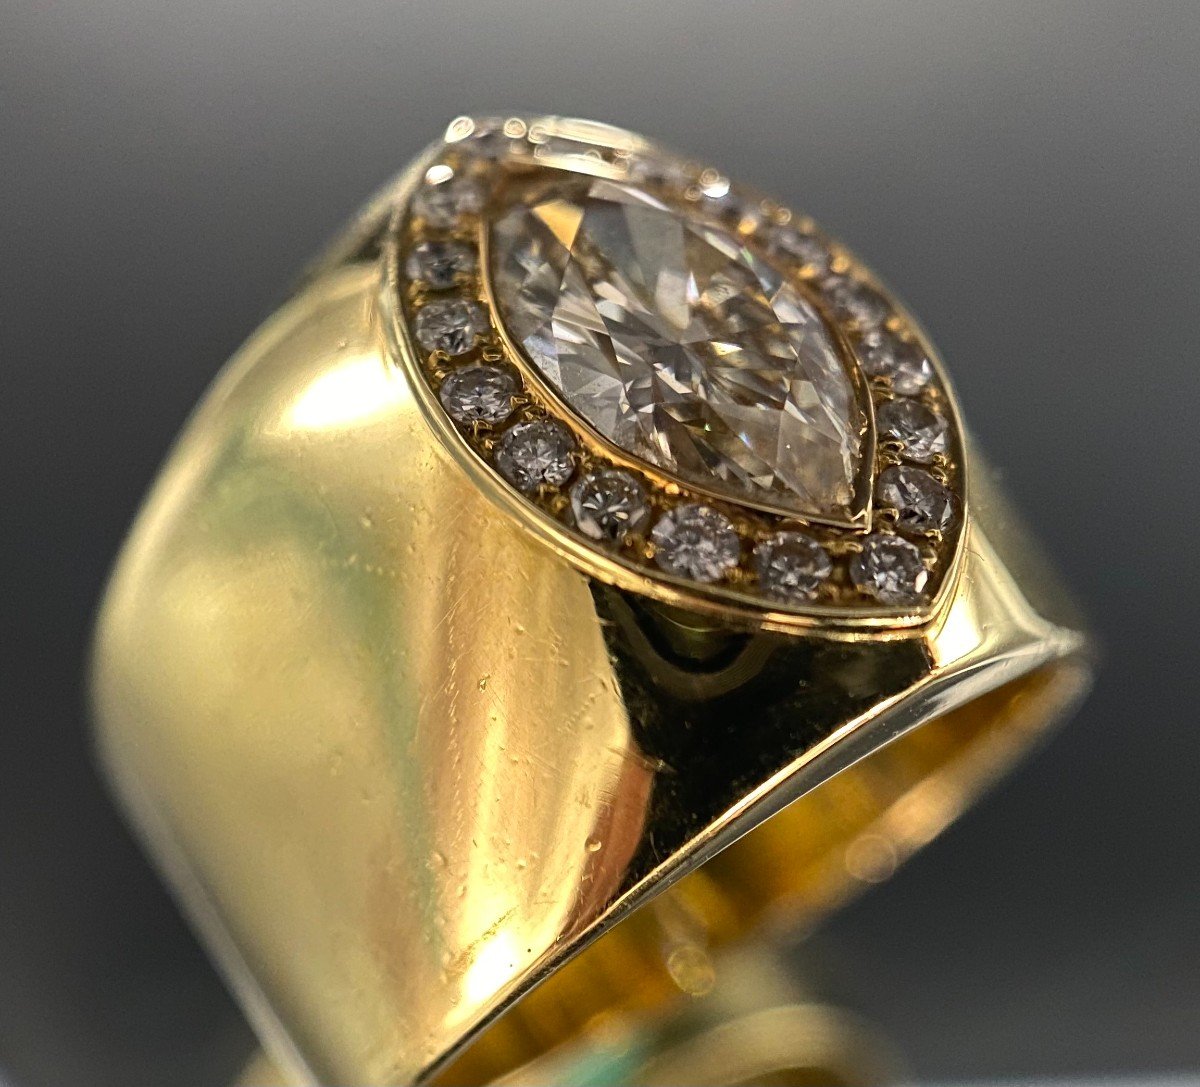 18k Yellow Gold Ring With Marquise Cut Diamond Of 1.50 Carats (si - G / H)